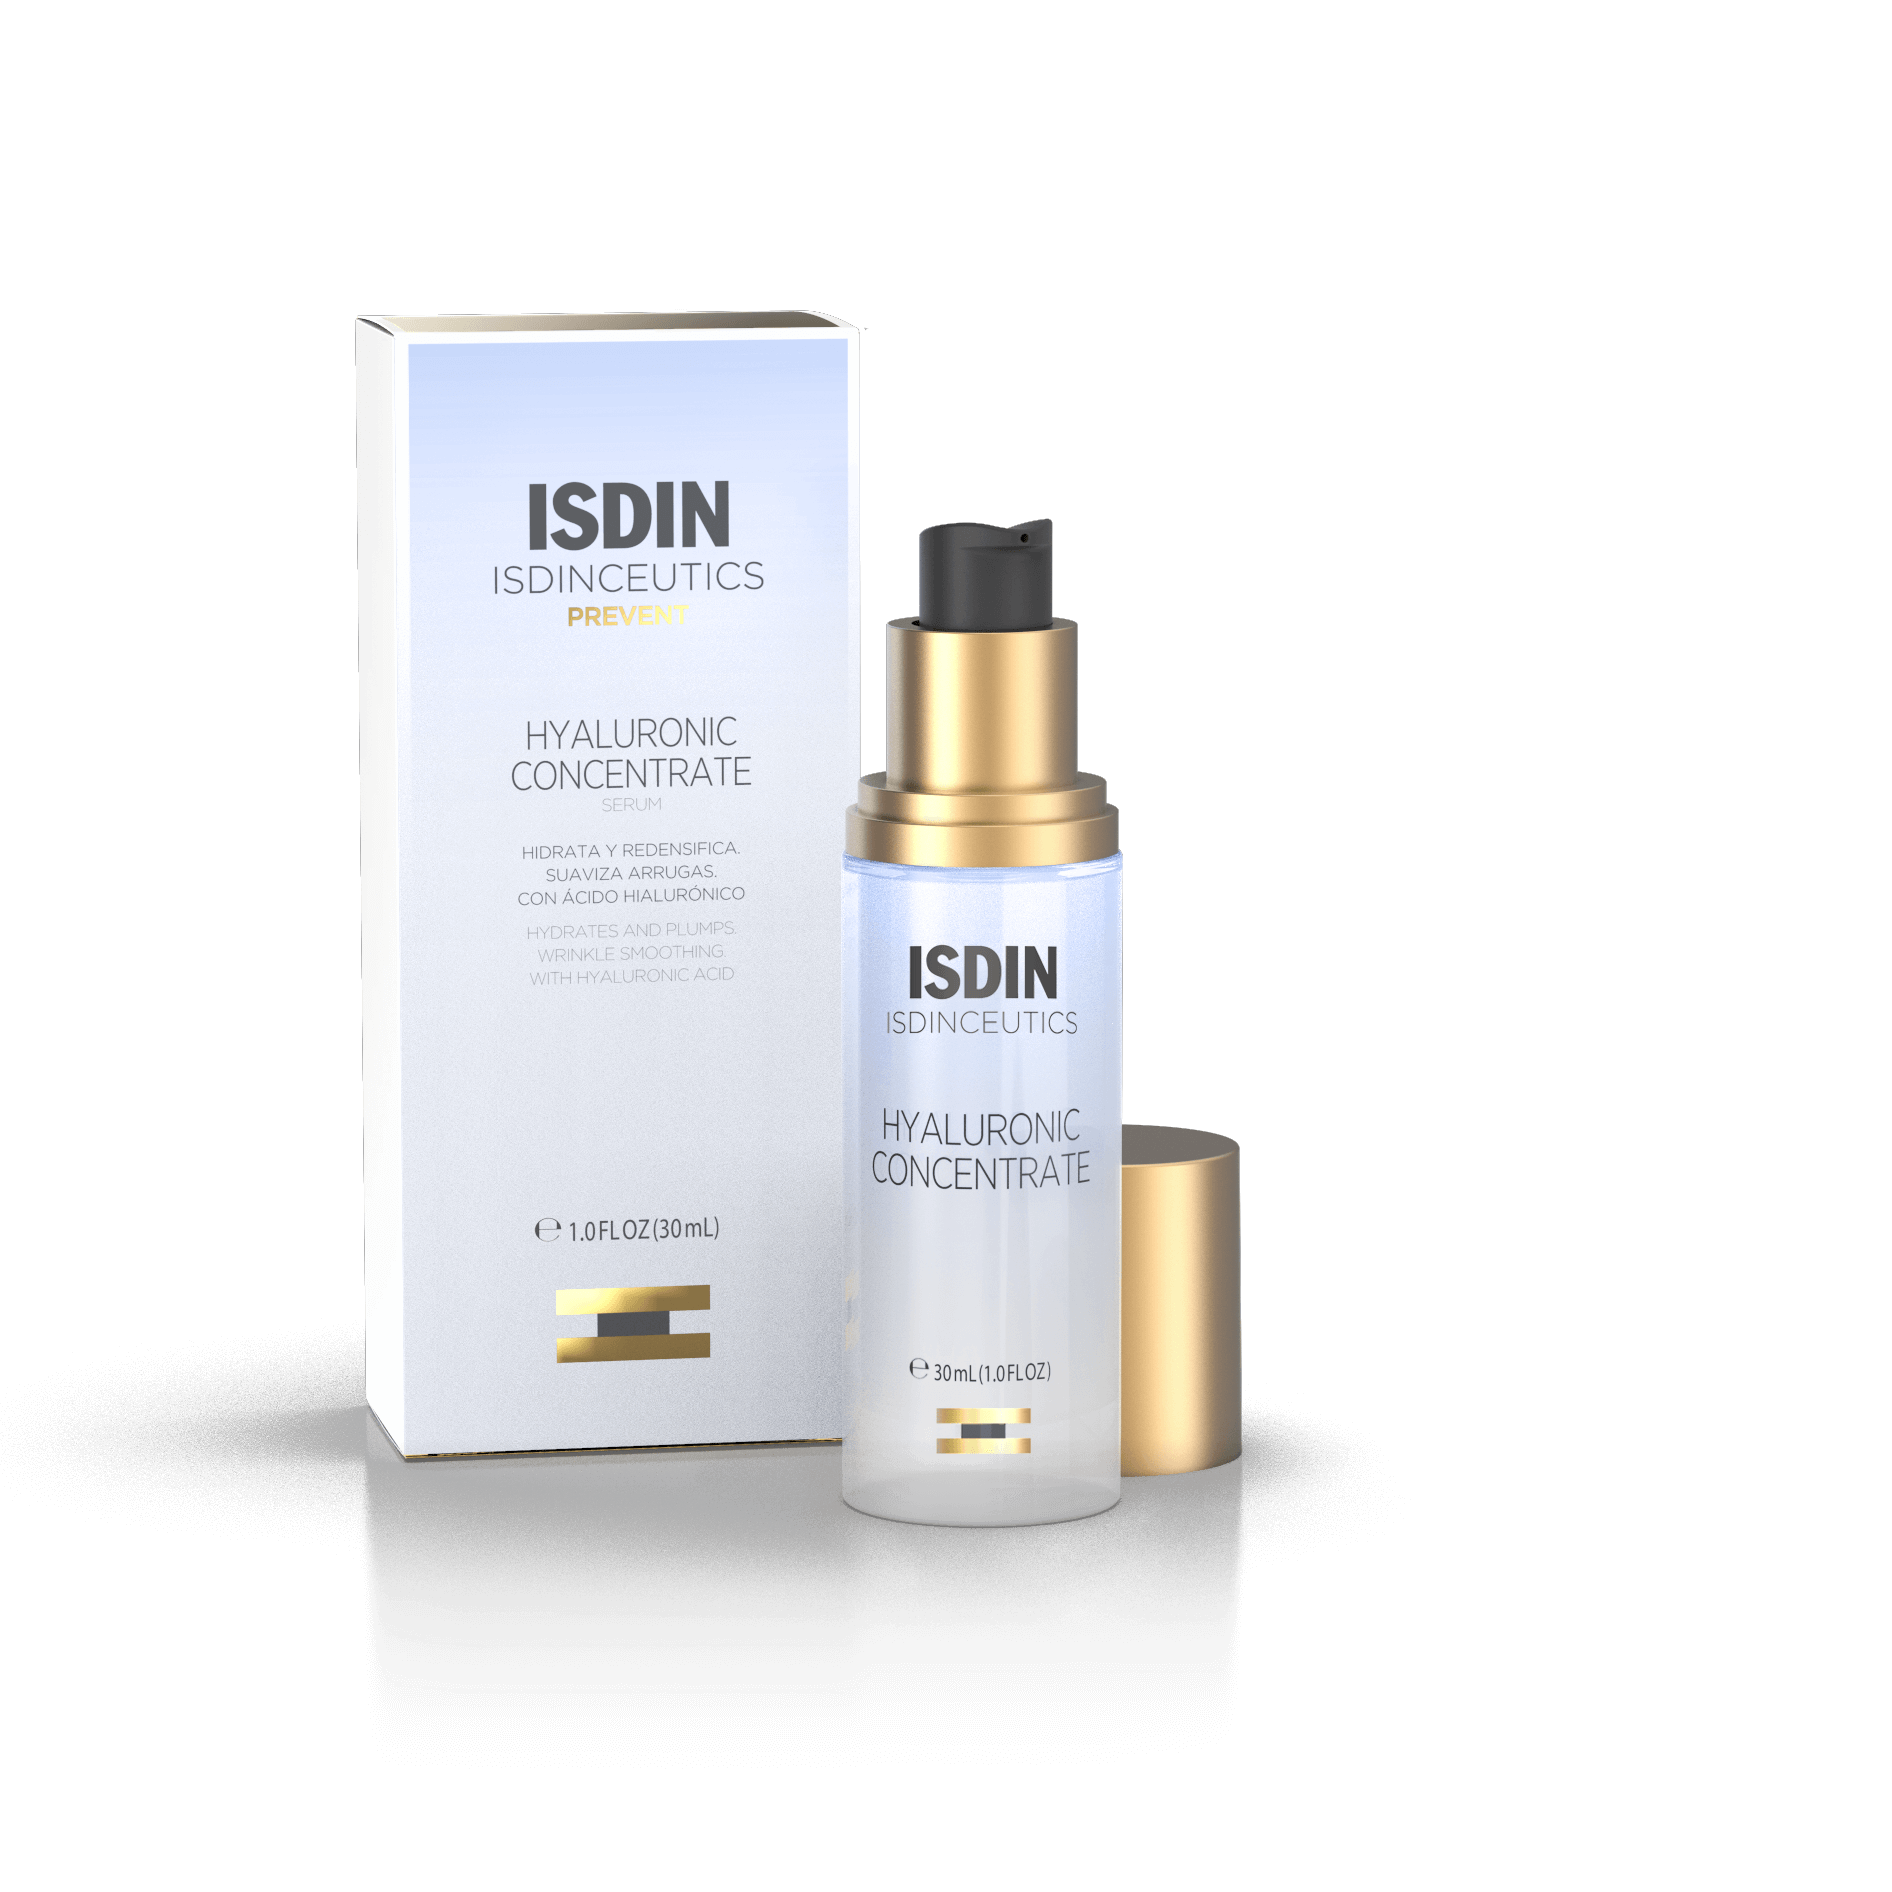 ISDIN® Isdinceutics Hyaluronic Concentrate